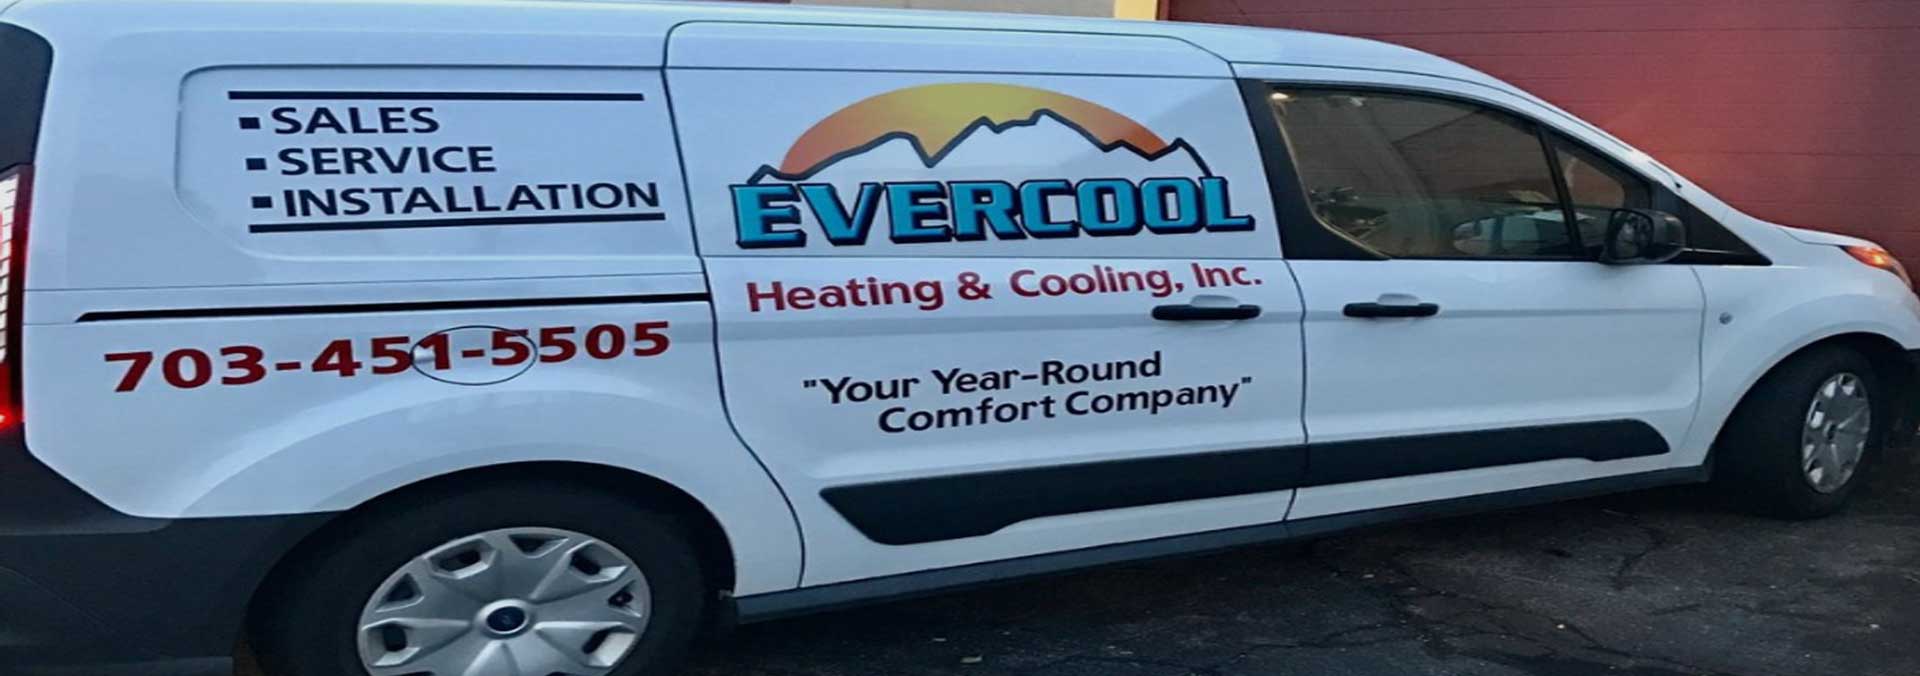 evercool heating and cooling